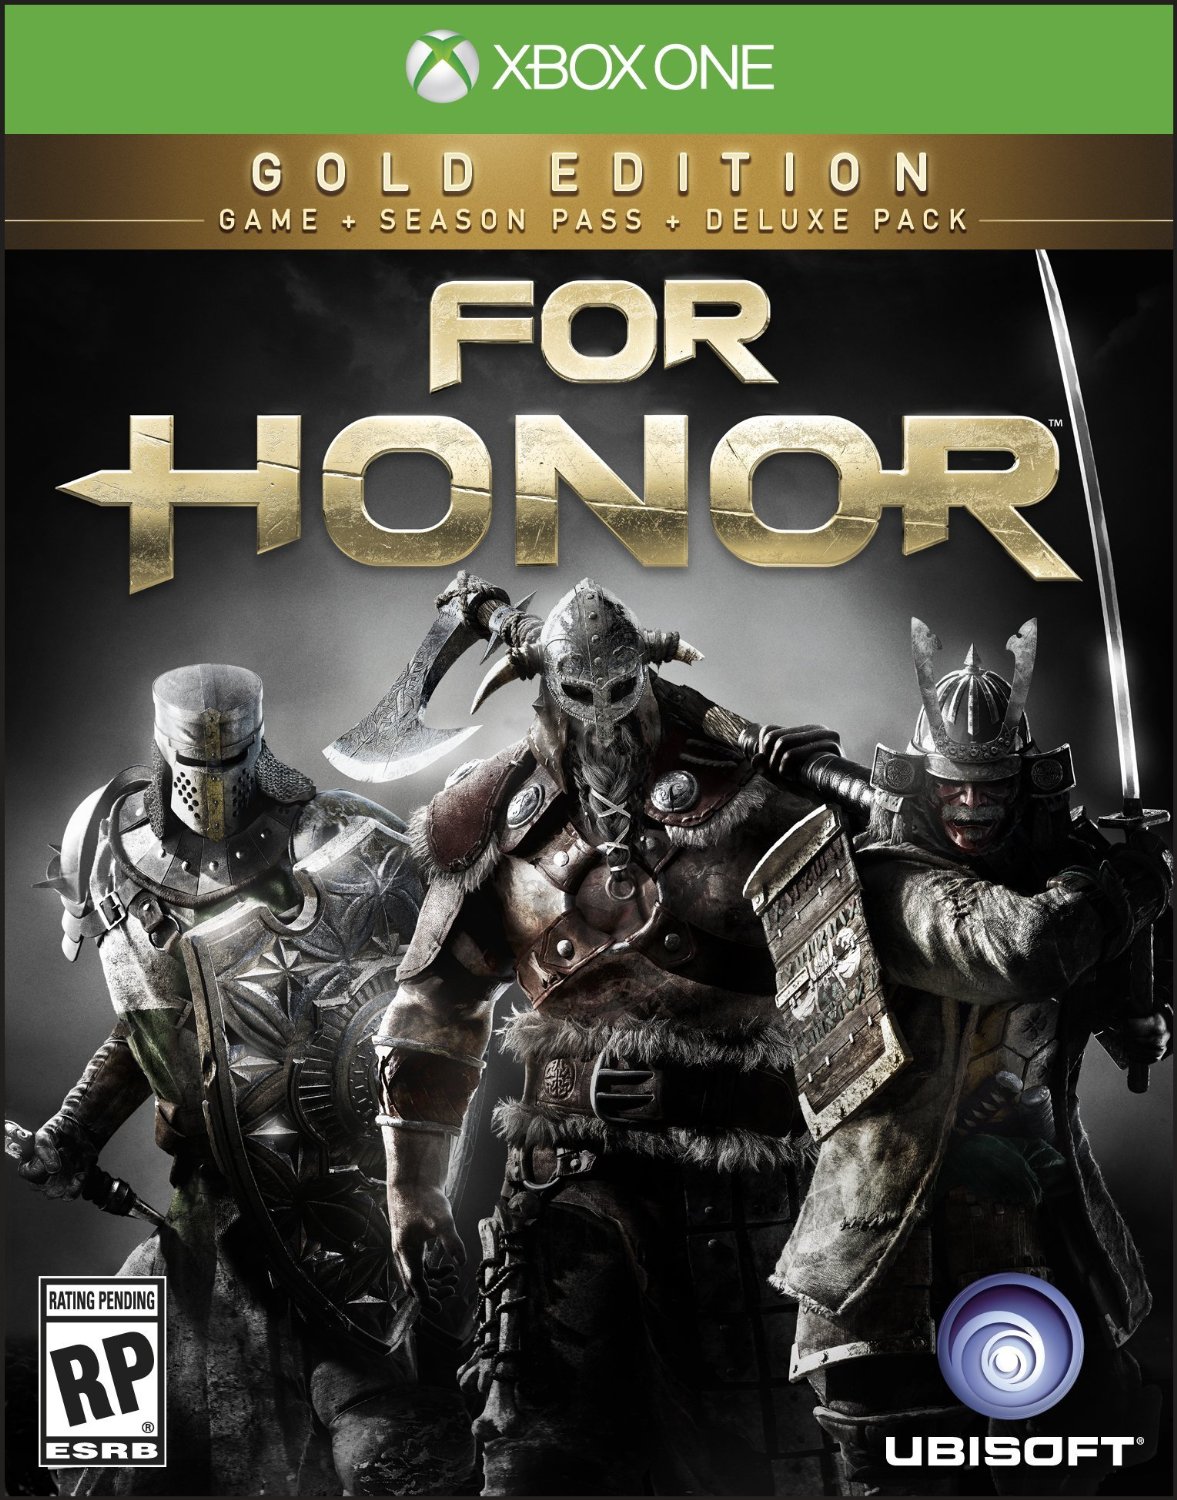 For Honor Gold Edition (Xbox One), Ubisoft Montreal